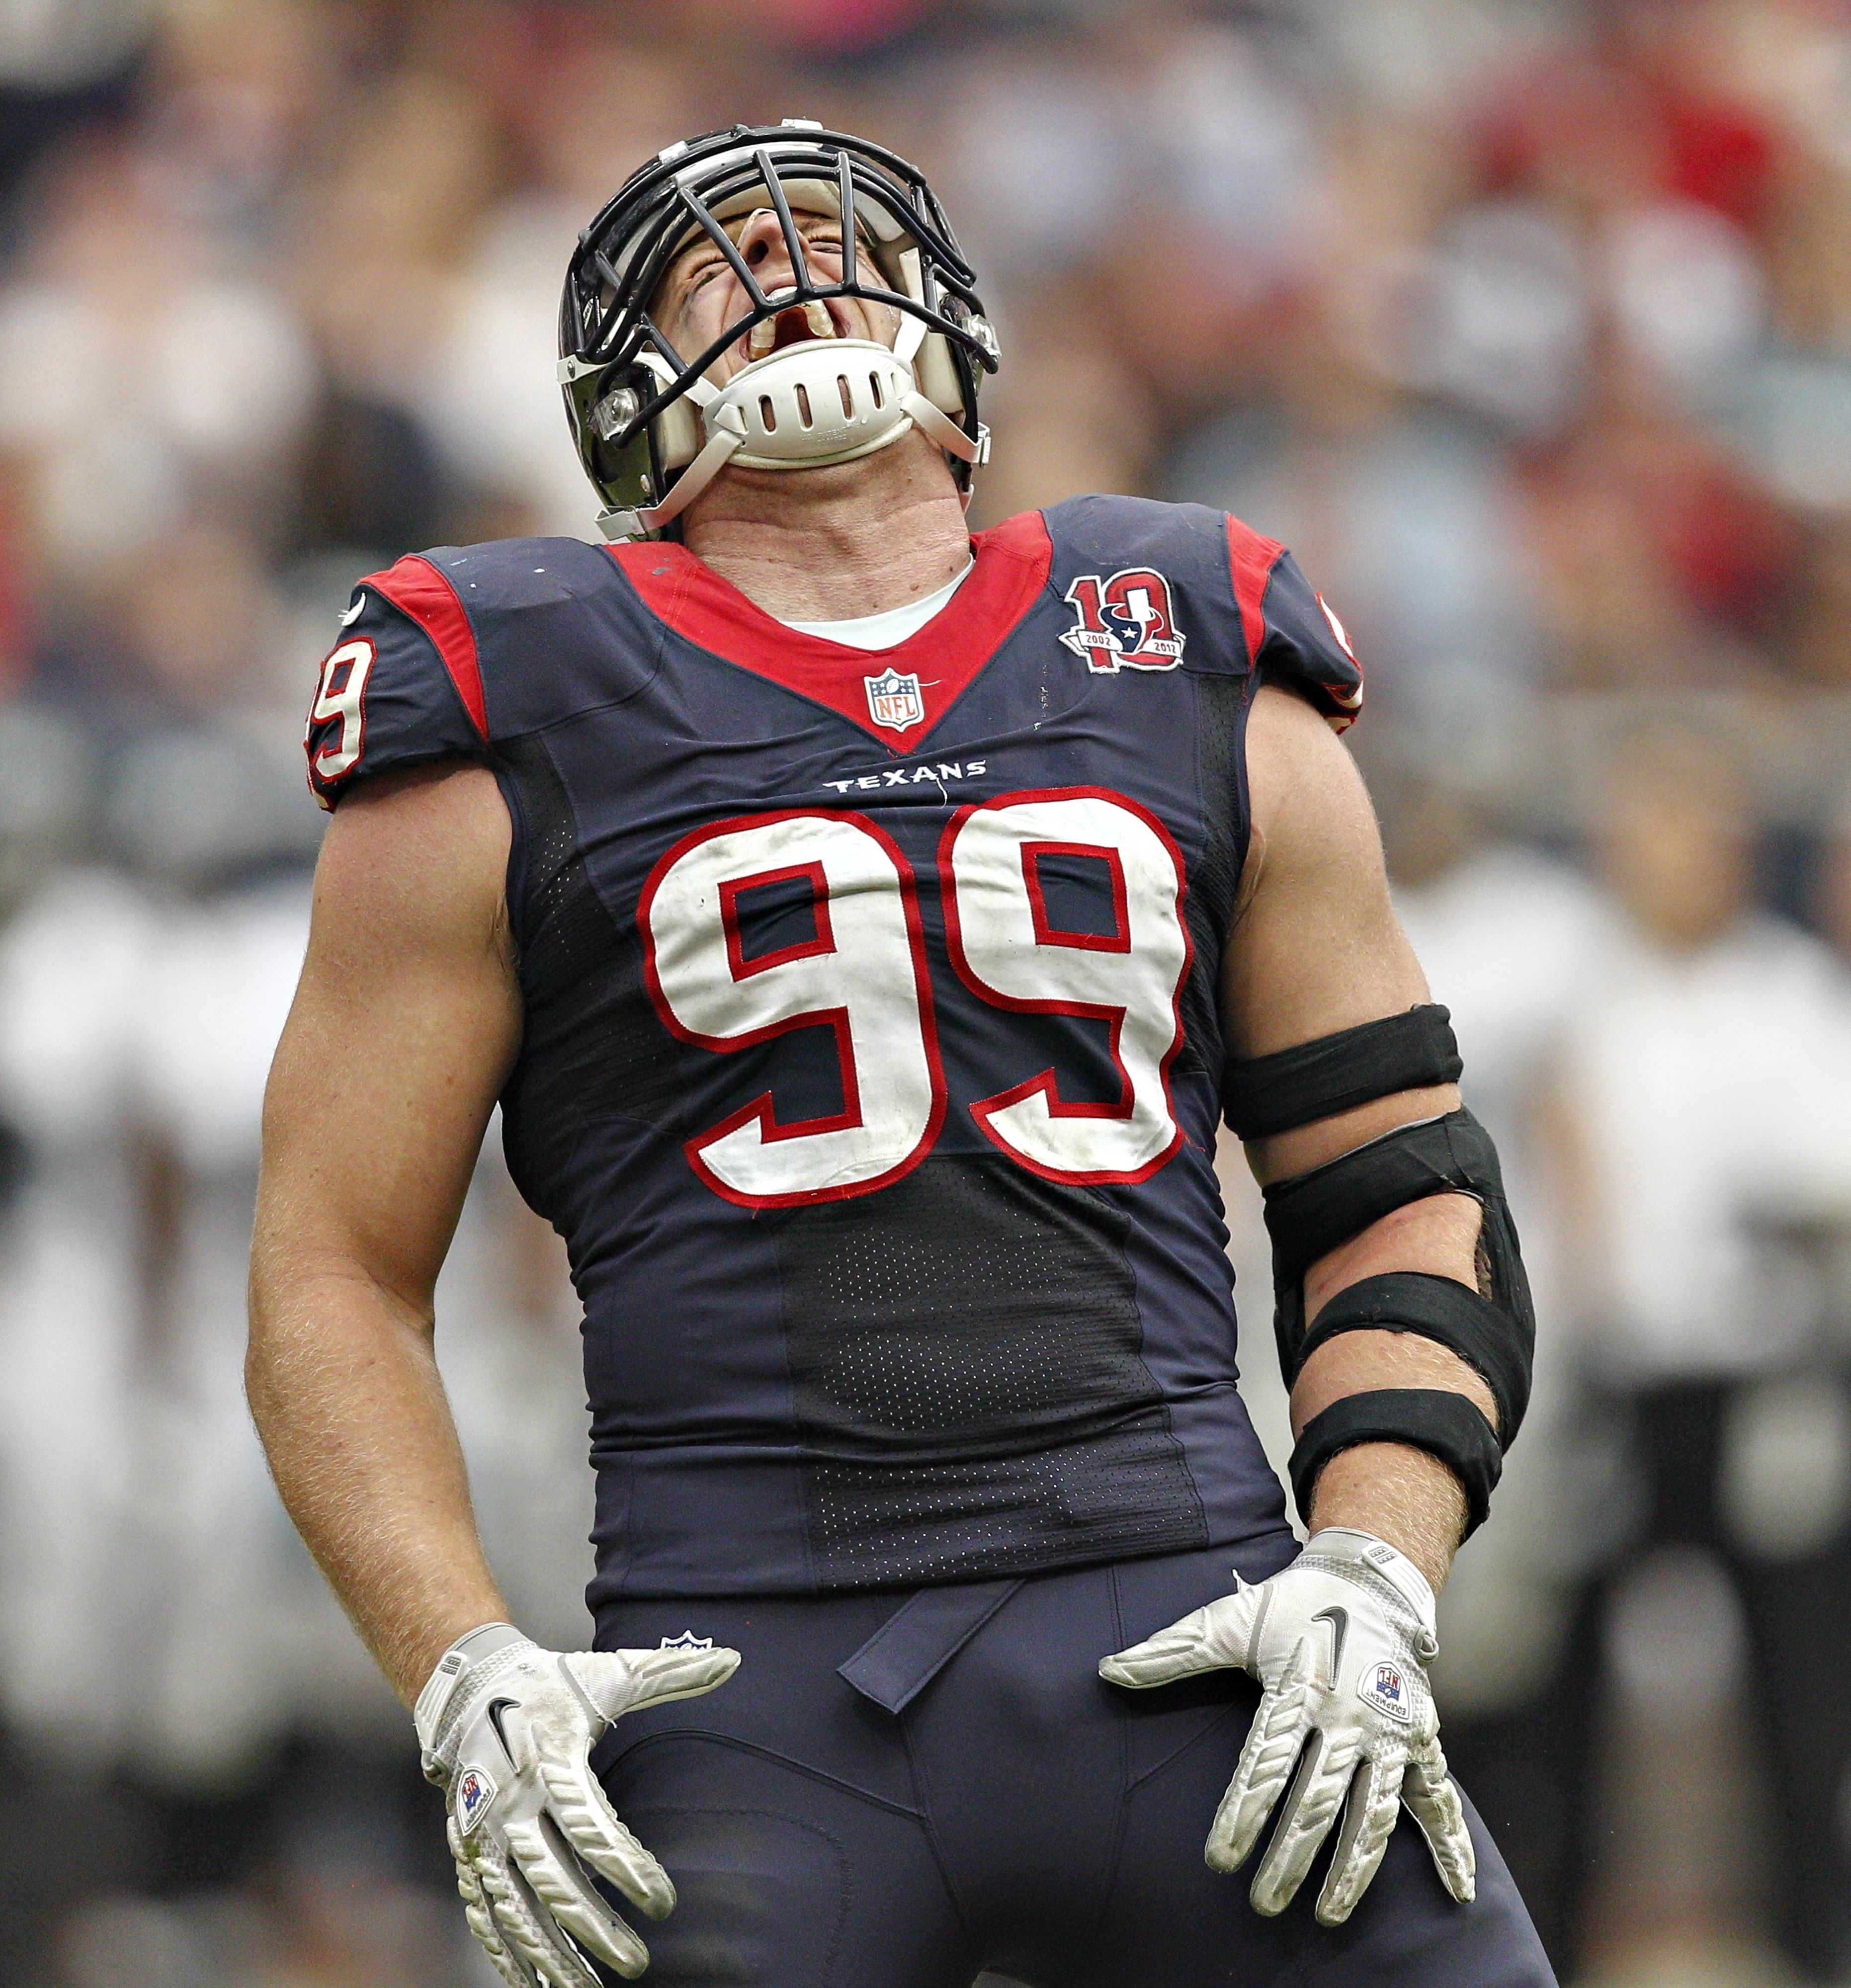 While not a GIF, J.J. Watt shows his unparalleled intensity.